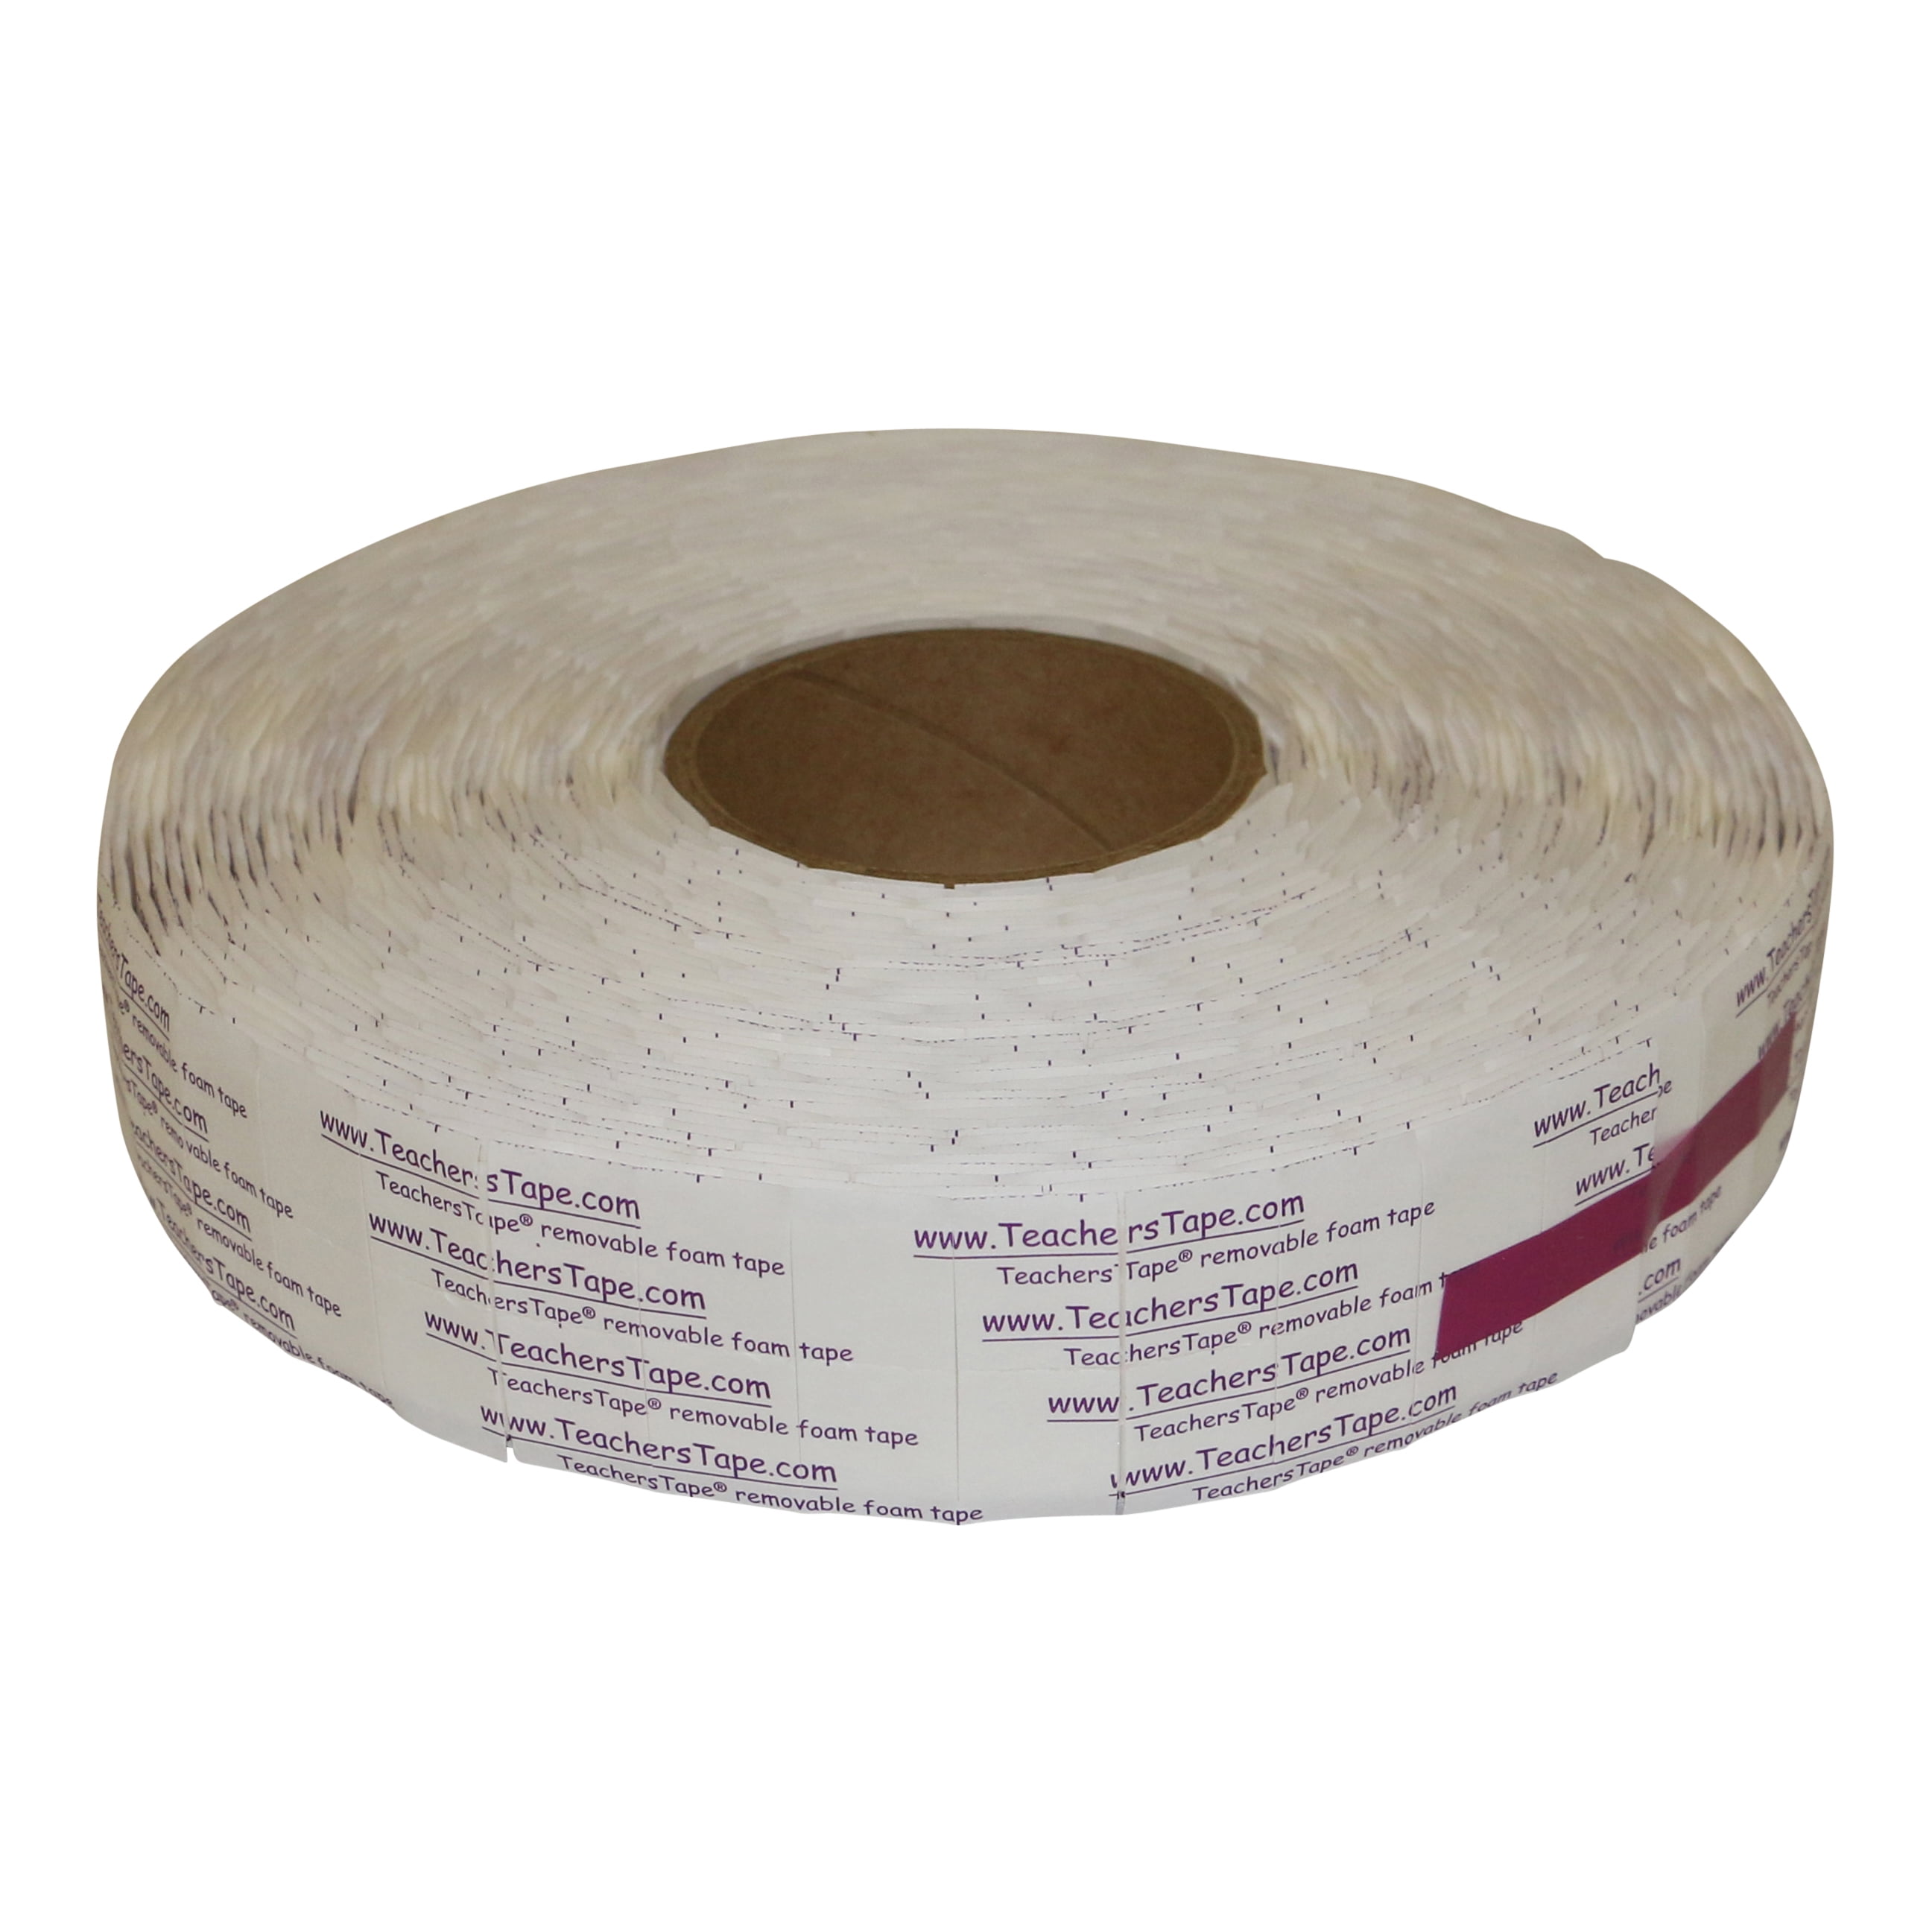 FindTape TeachersTape Double-Sided Removable Foam Tape Pads: 3/4 in x 3/4 in. (White) / 2000 Pads/Roll